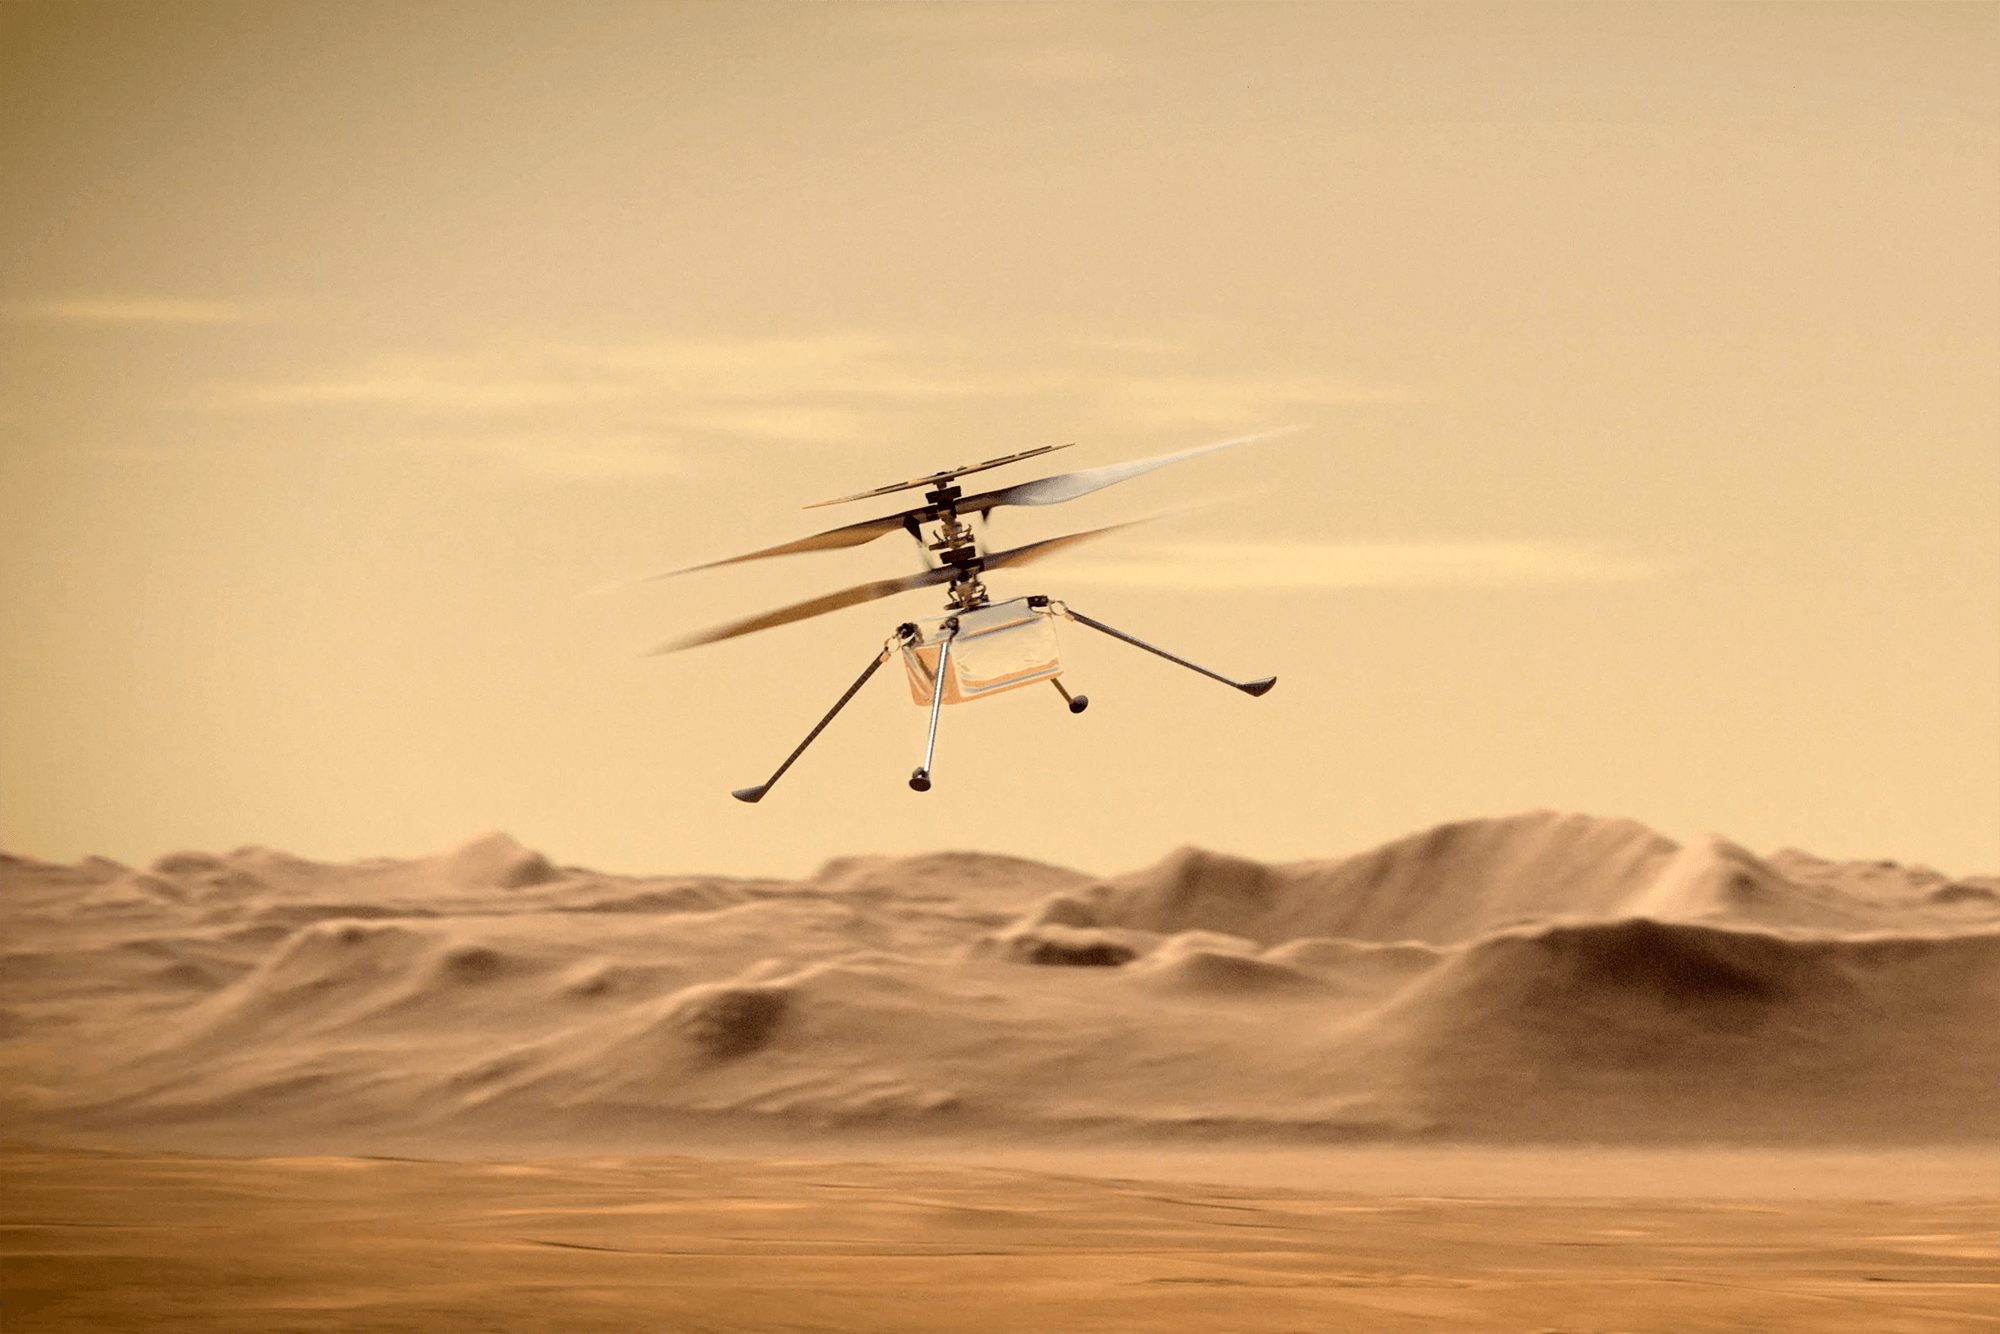 Mars helicopter ingenuity hits flight number 23 and can’t be stopped